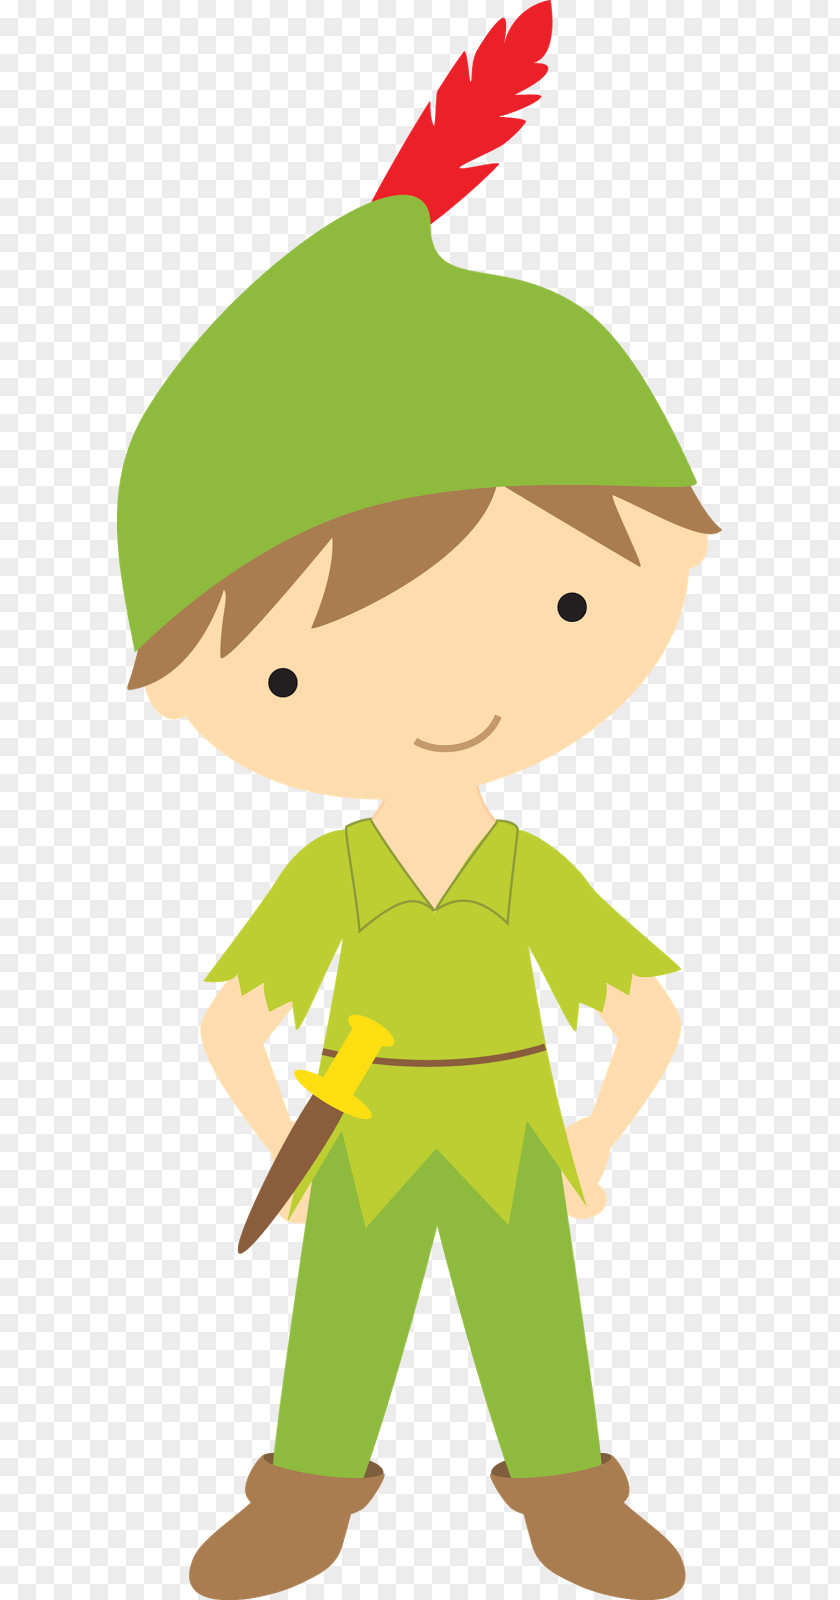 Peter Pan Dress-Up Day 2017 Character Costume Yokine Primary School Clip Art PNG